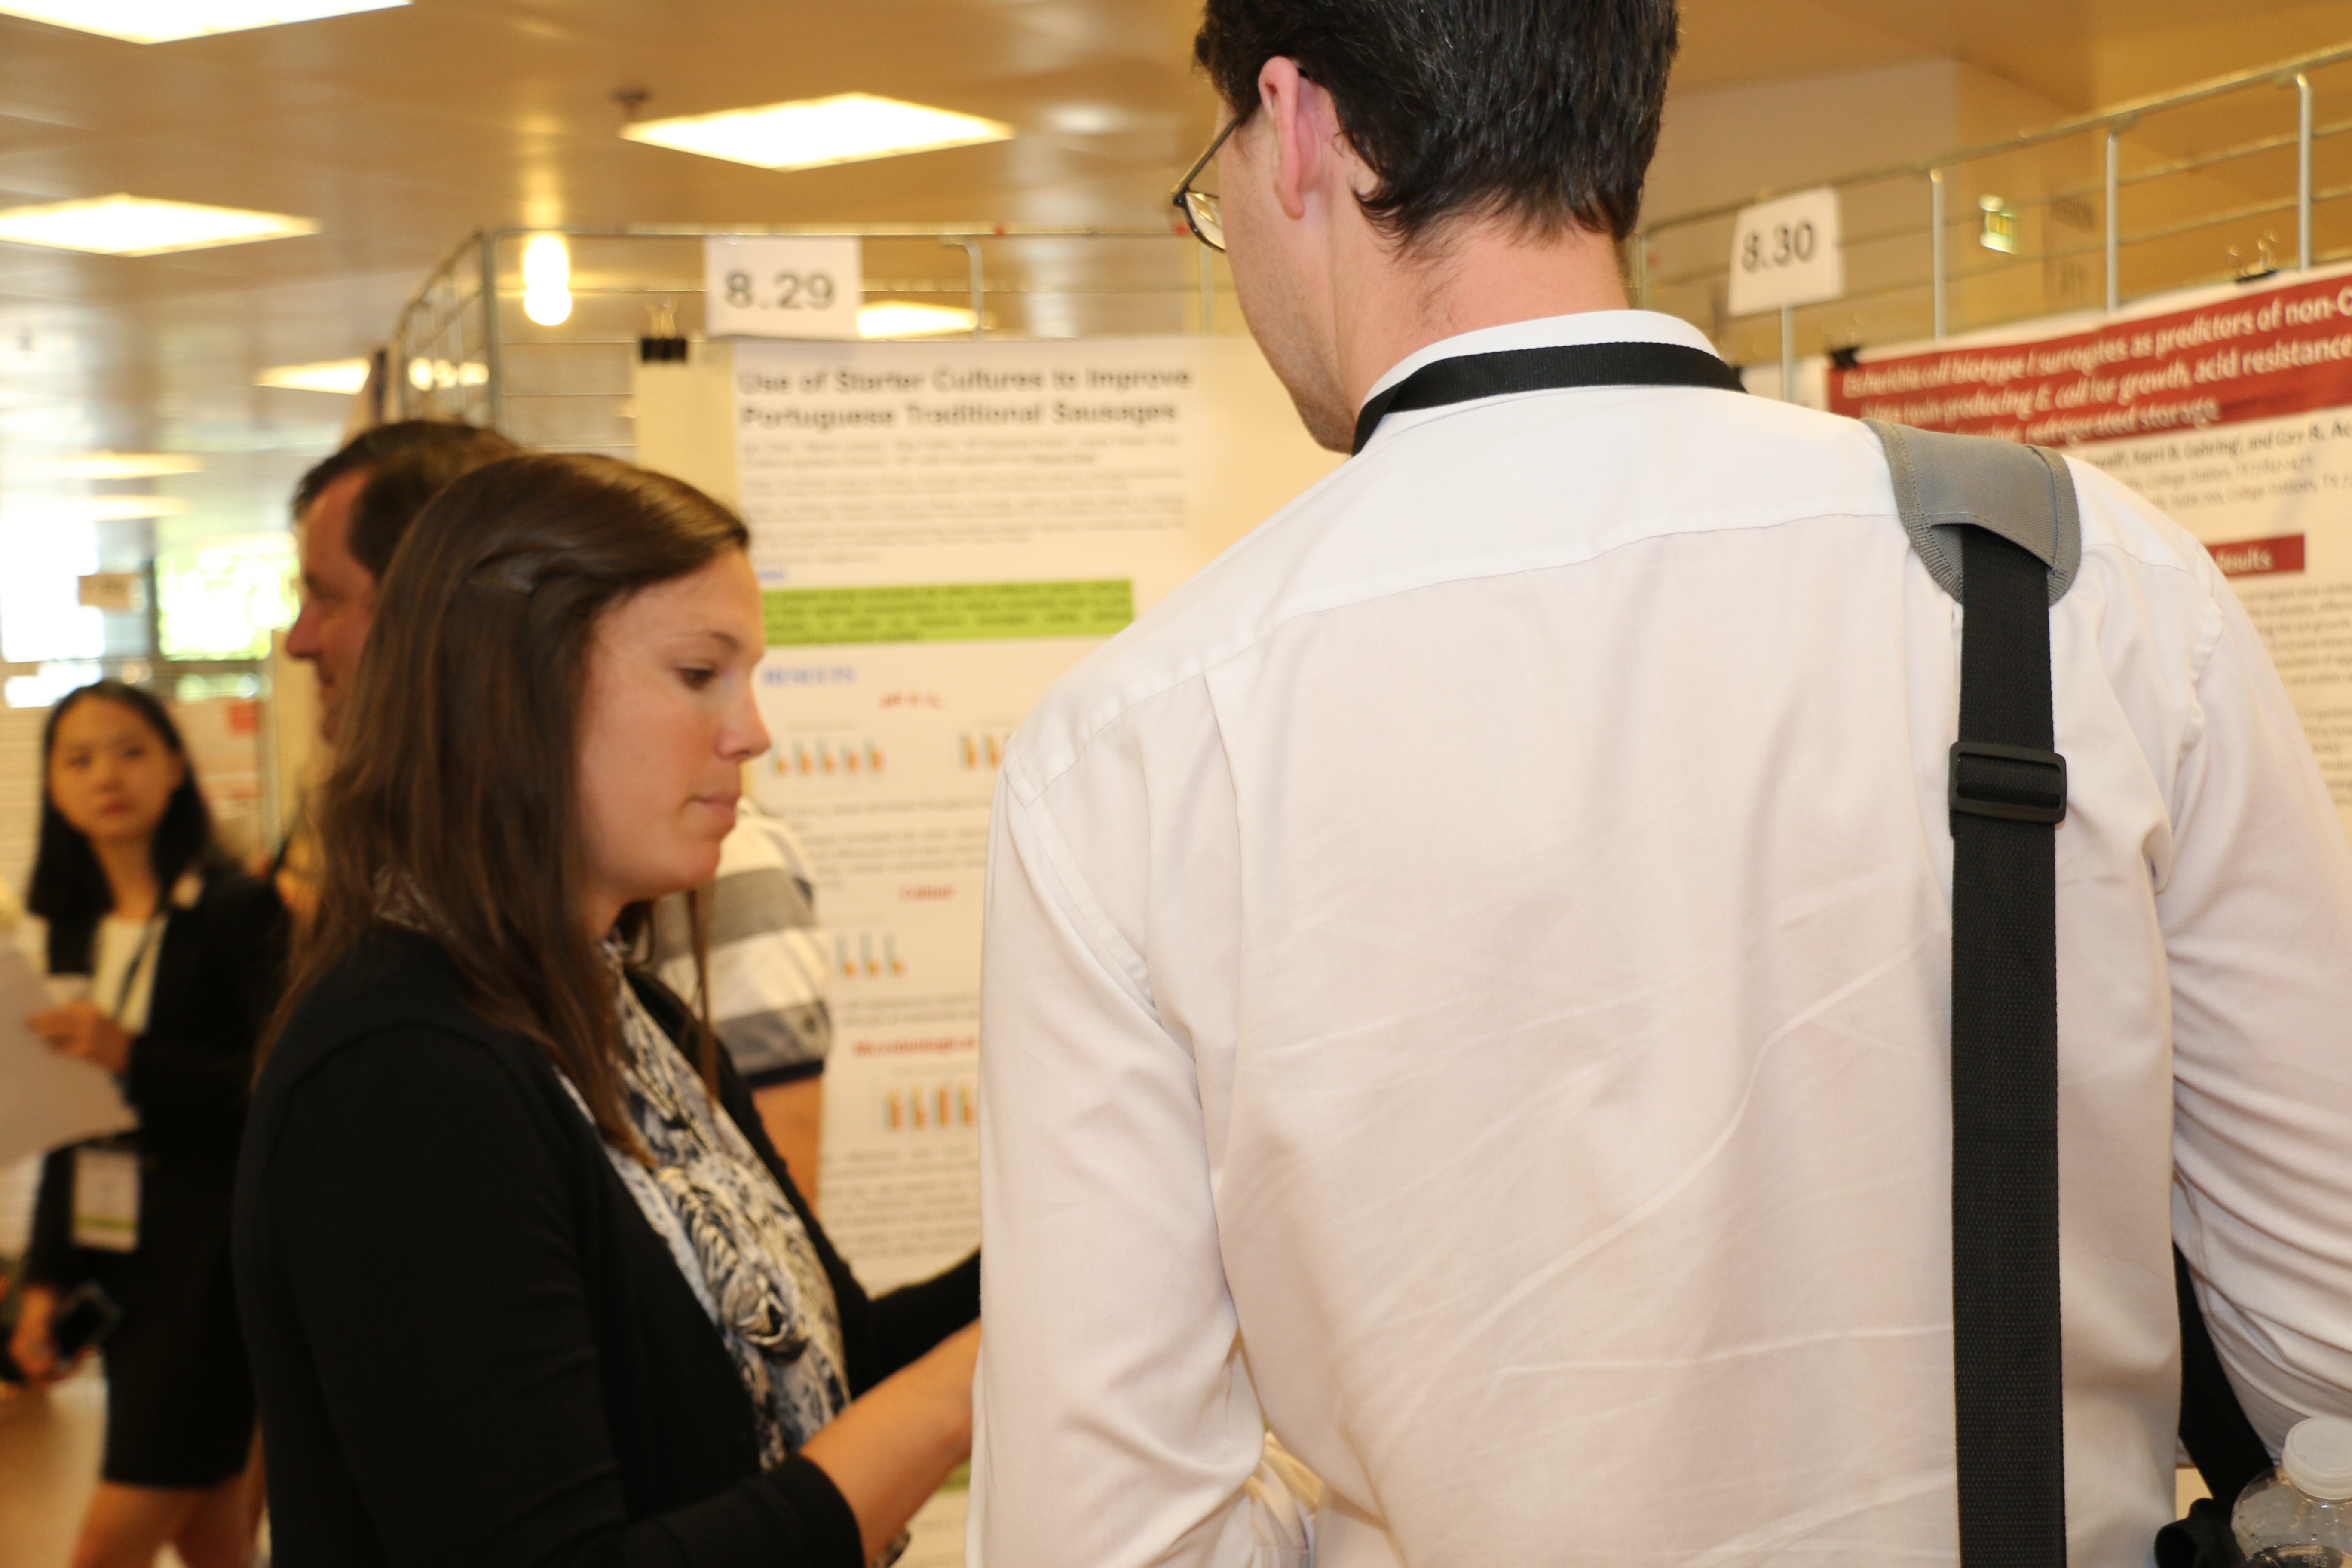 Lindsey Mehall discussing findings during poster session